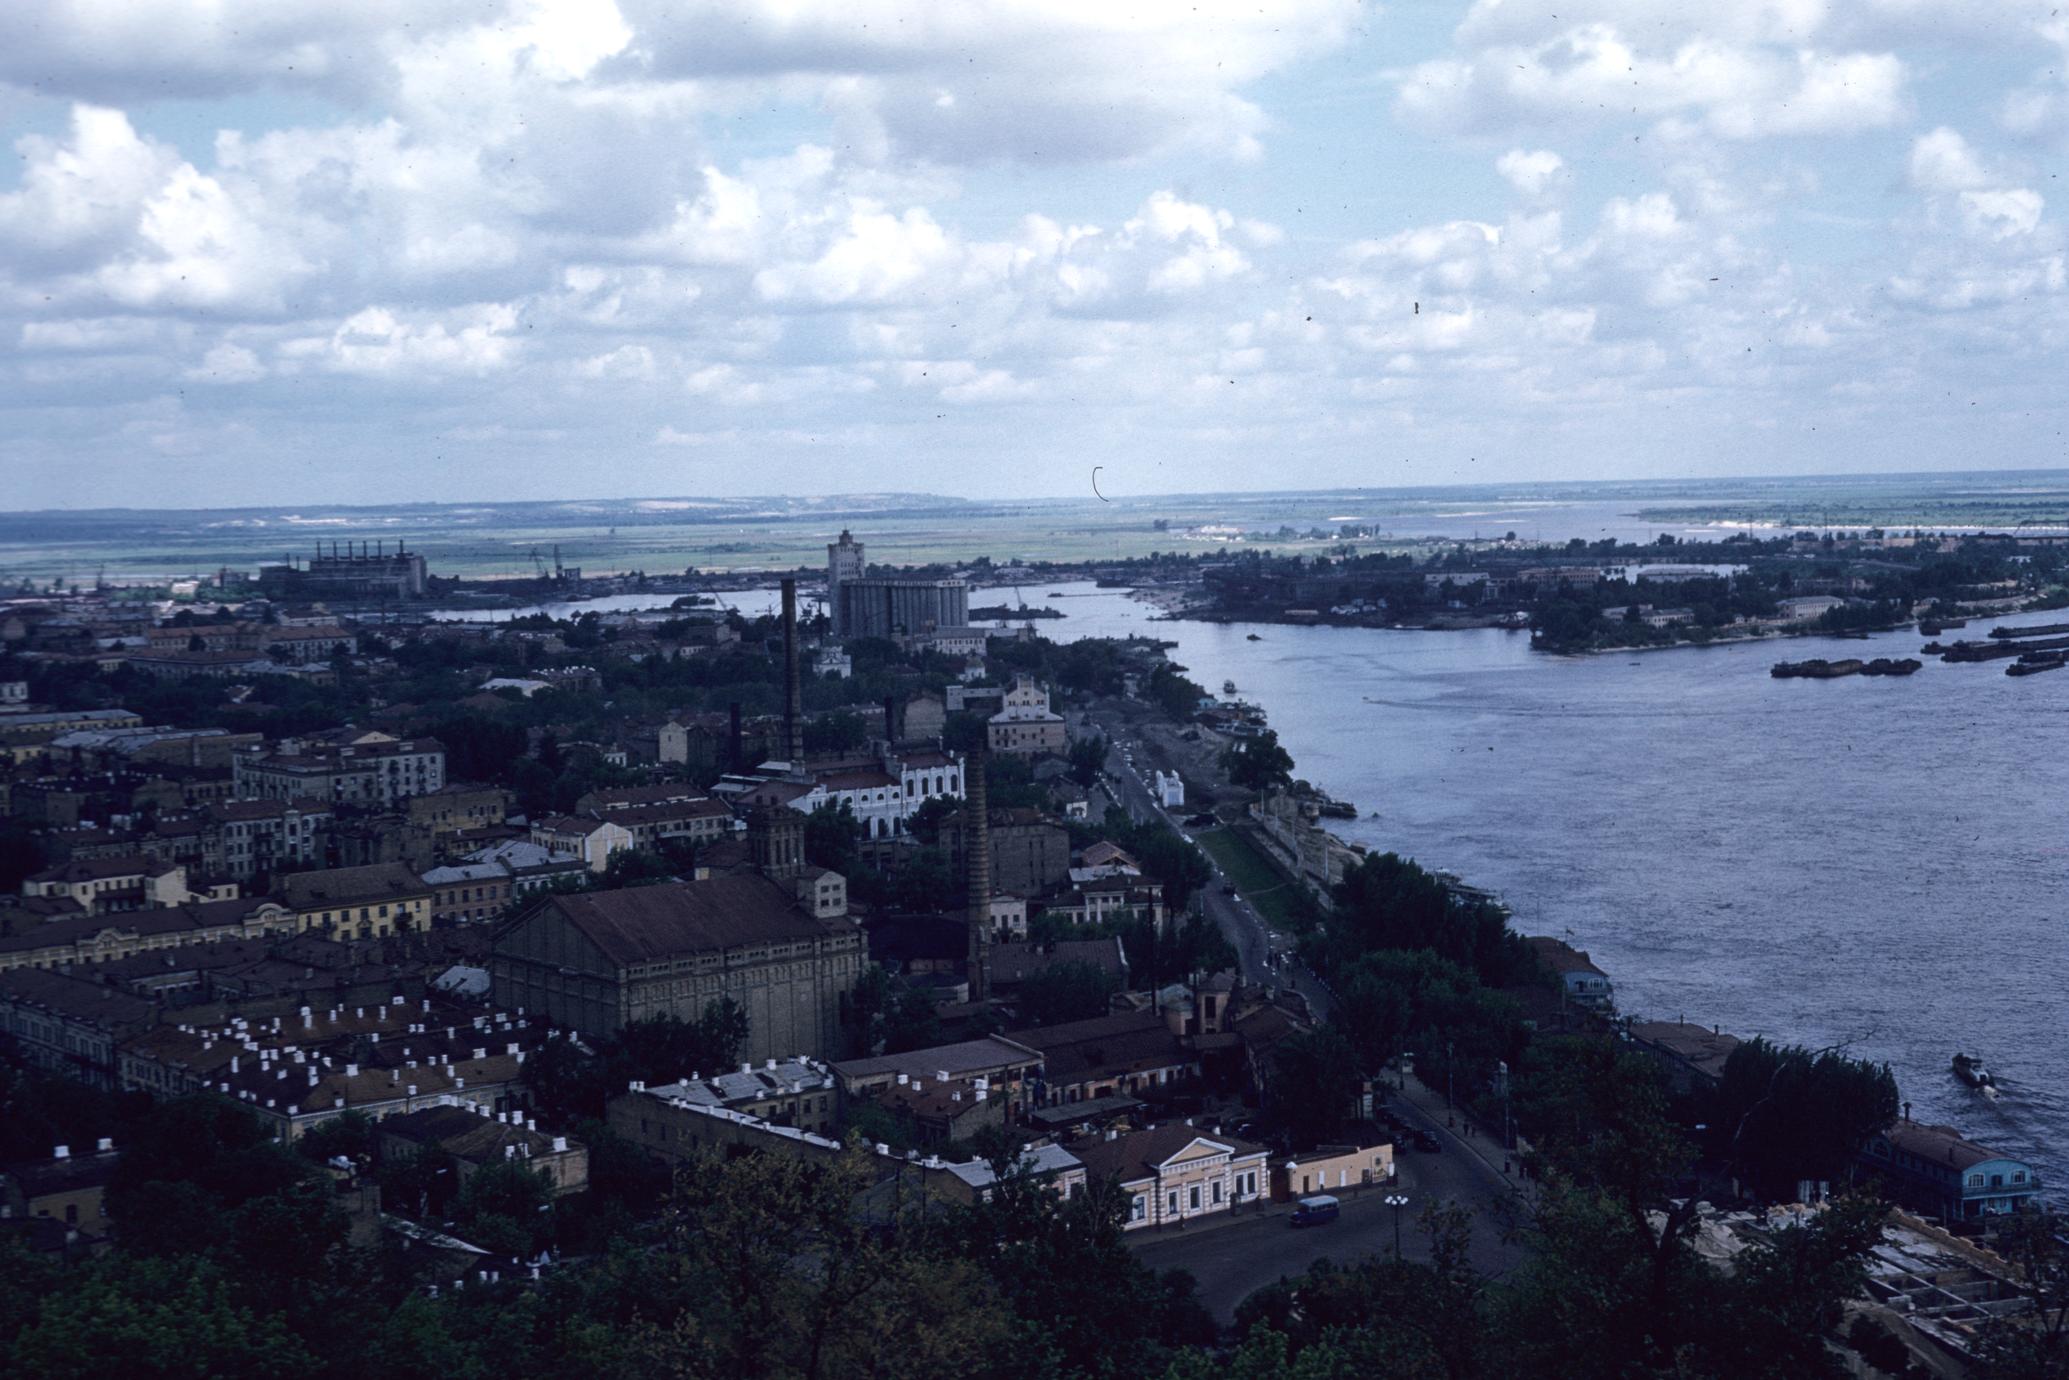 Kiev and the Dnieper River